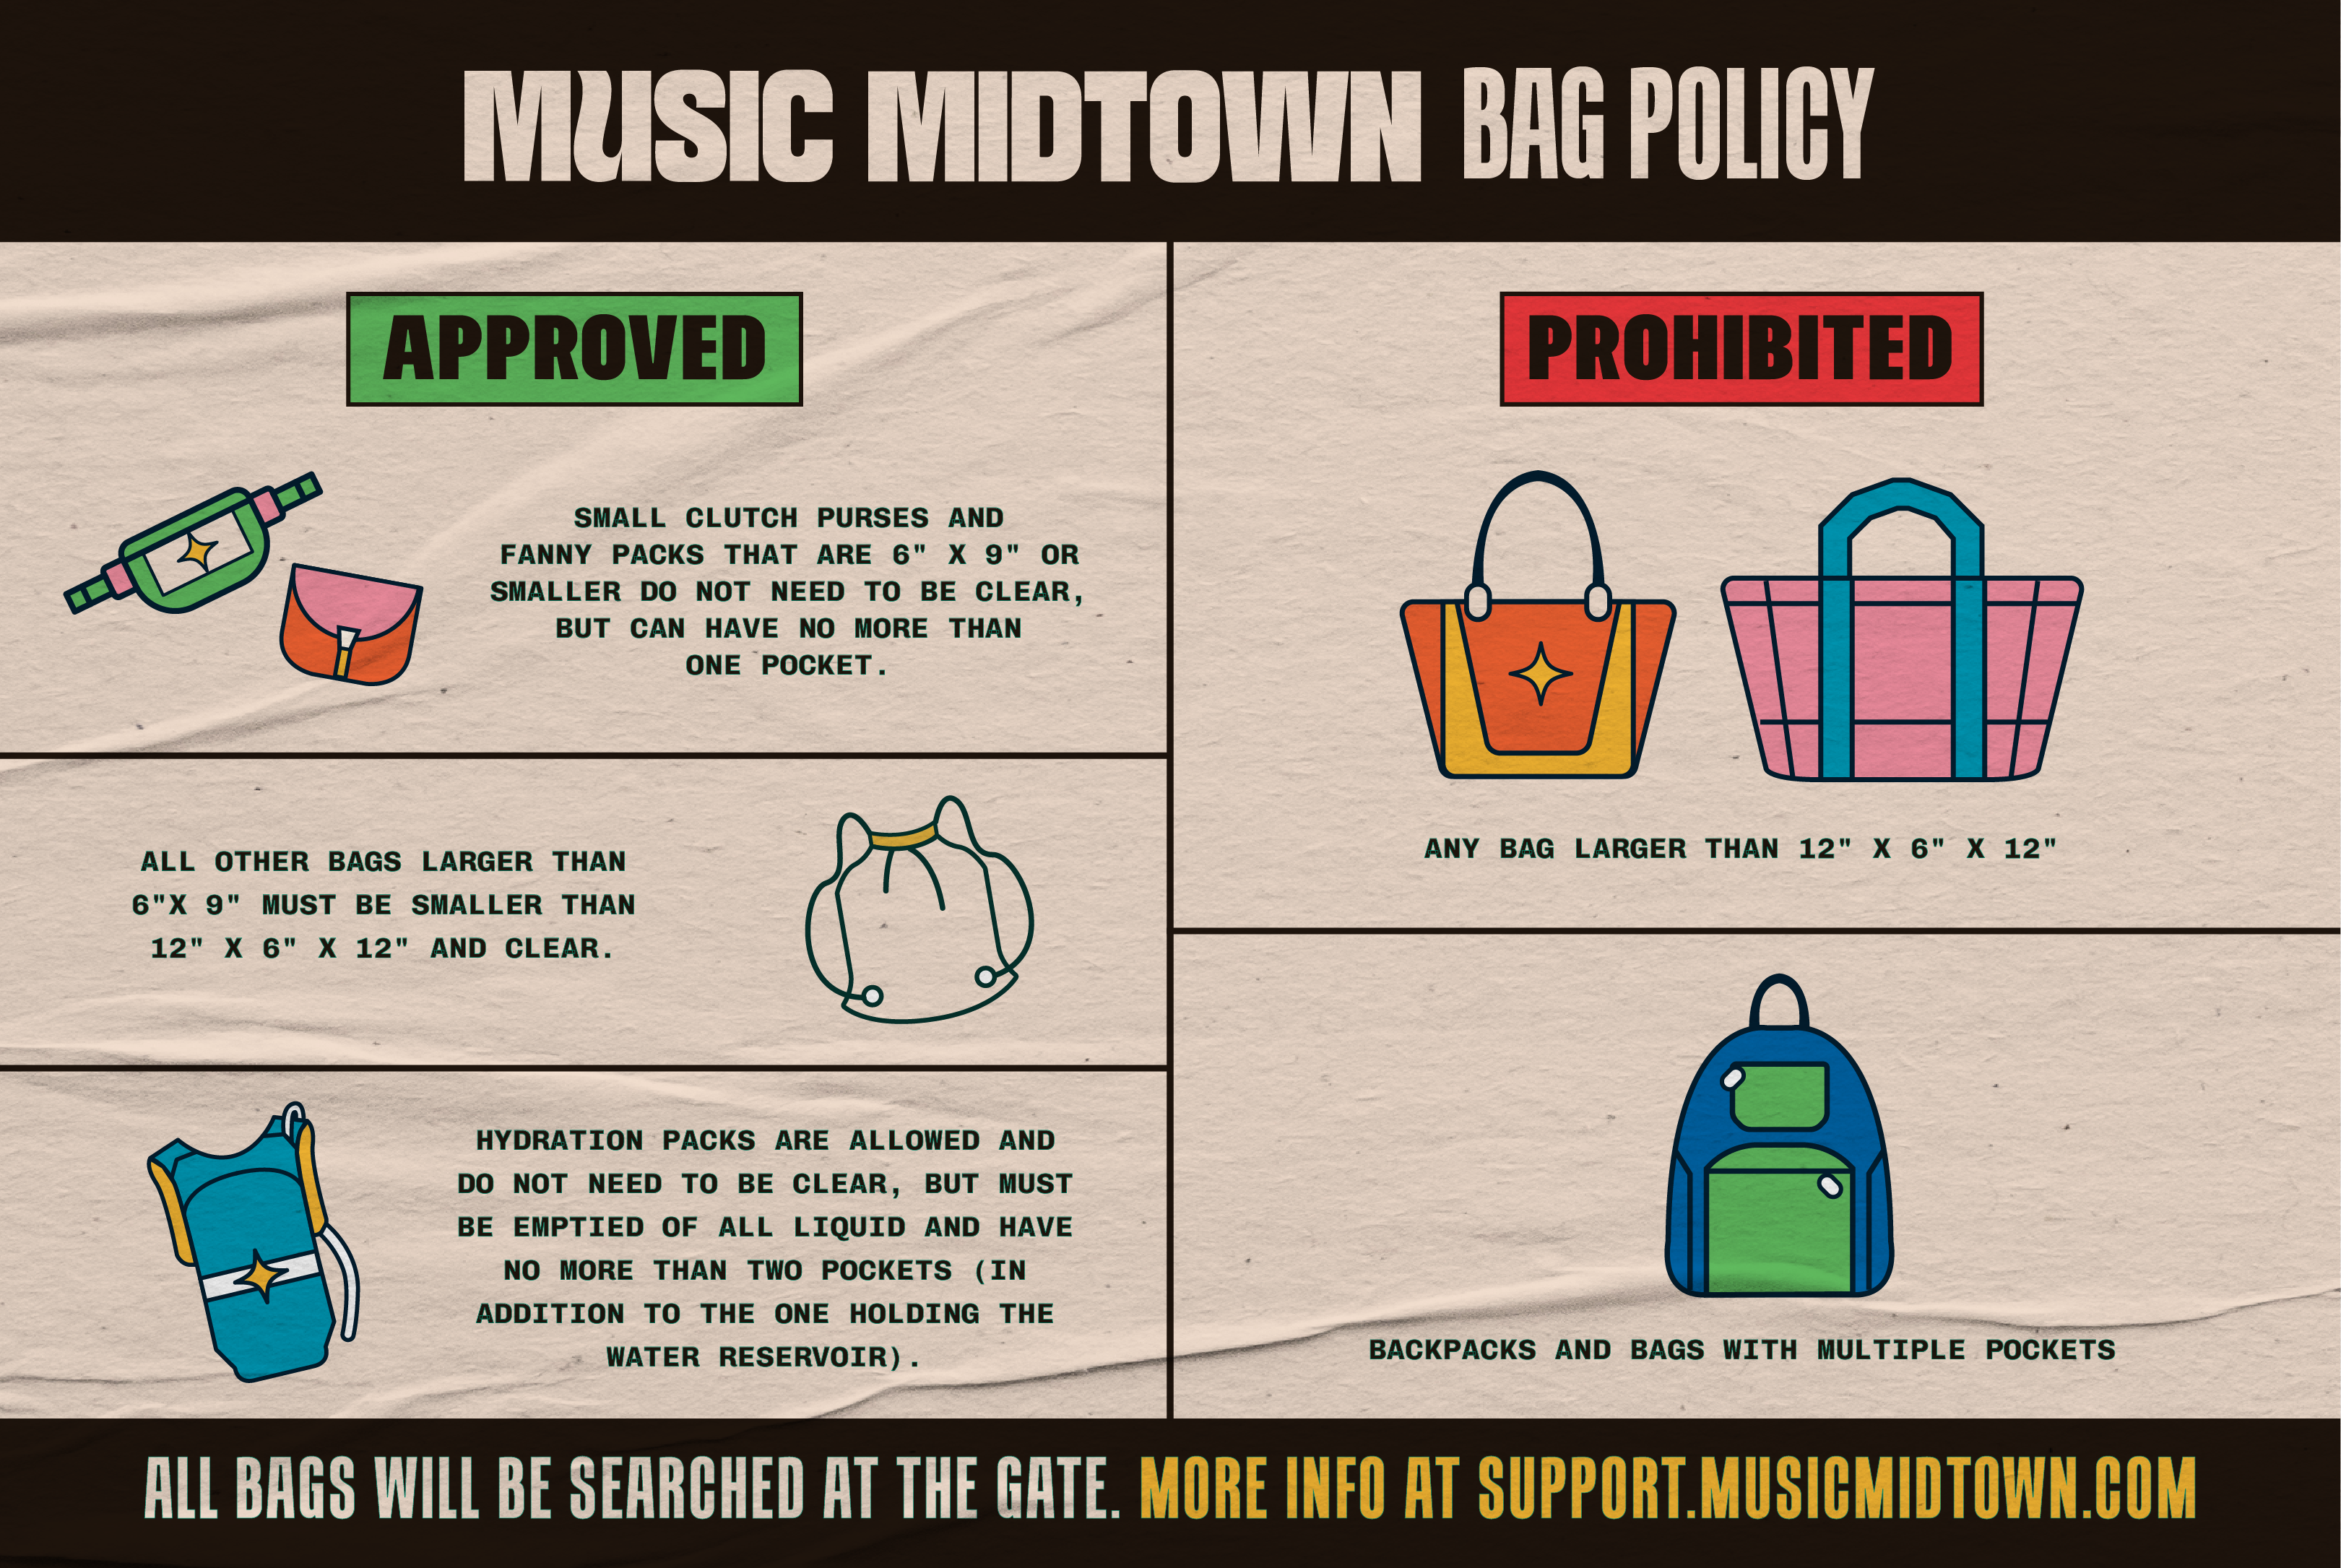 MM23-BagPolicy-1080w.png